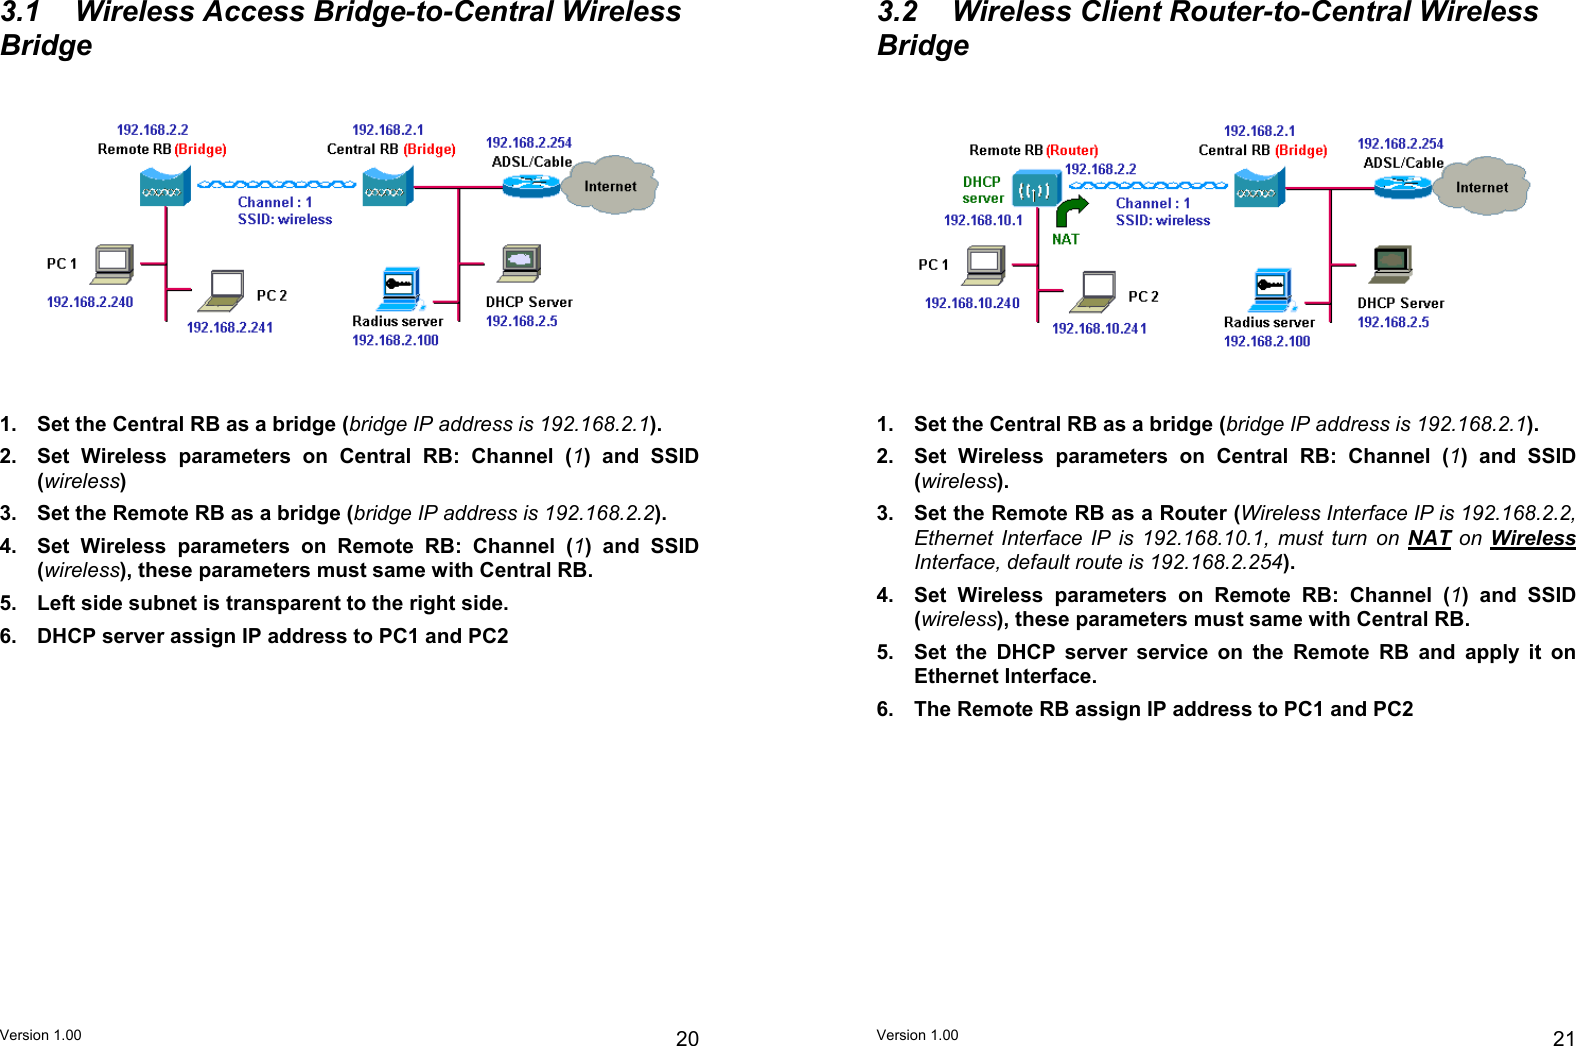 3.1  Wireless Access Bridge-to-Central Wireless Bridge 3.2  Wireless Client Router-to-Central Wireless Bridge    1.  Set the Central RB as a bridge (bridge IP address is 192.168.2.1).  1.  Set the Central RB as a bridge (bridge IP address is 192.168.2.1). 2.  Set Wireless parameters on Central RB: Channel (1) and SSID (wireless) 2.  Set Wireless parameters on Central RB: Channel (1) and SSID (wireless). 3.  Set the Remote RB as a bridge (bridge IP address is 192.168.2.2).  3.  Set the Remote RB as a Router (Wireless Interface IP is 192.168.2.2, Ethernet Interface IP is 192.168.10.1, must turn on NAT on Wireless Interface, default route is 192.168.2.254). 4.  Set Wireless parameters on Remote RB: Channel (1) and SSID (wireless), these parameters must same with Central RB. 4.  Set Wireless parameters on Remote RB: Channel (1) and SSID (wireless), these parameters must same with Central RB. 5.  Left side subnet is transparent to the right side. 6.  DHCP server assign IP address to PC1 and PC2  5.  Set the DHCP server service on the Remote RB and apply it on Ethernet Interface.   6.  The Remote RB assign IP address to PC1 and PC2    Version 1.00  20 Version 1.00  21